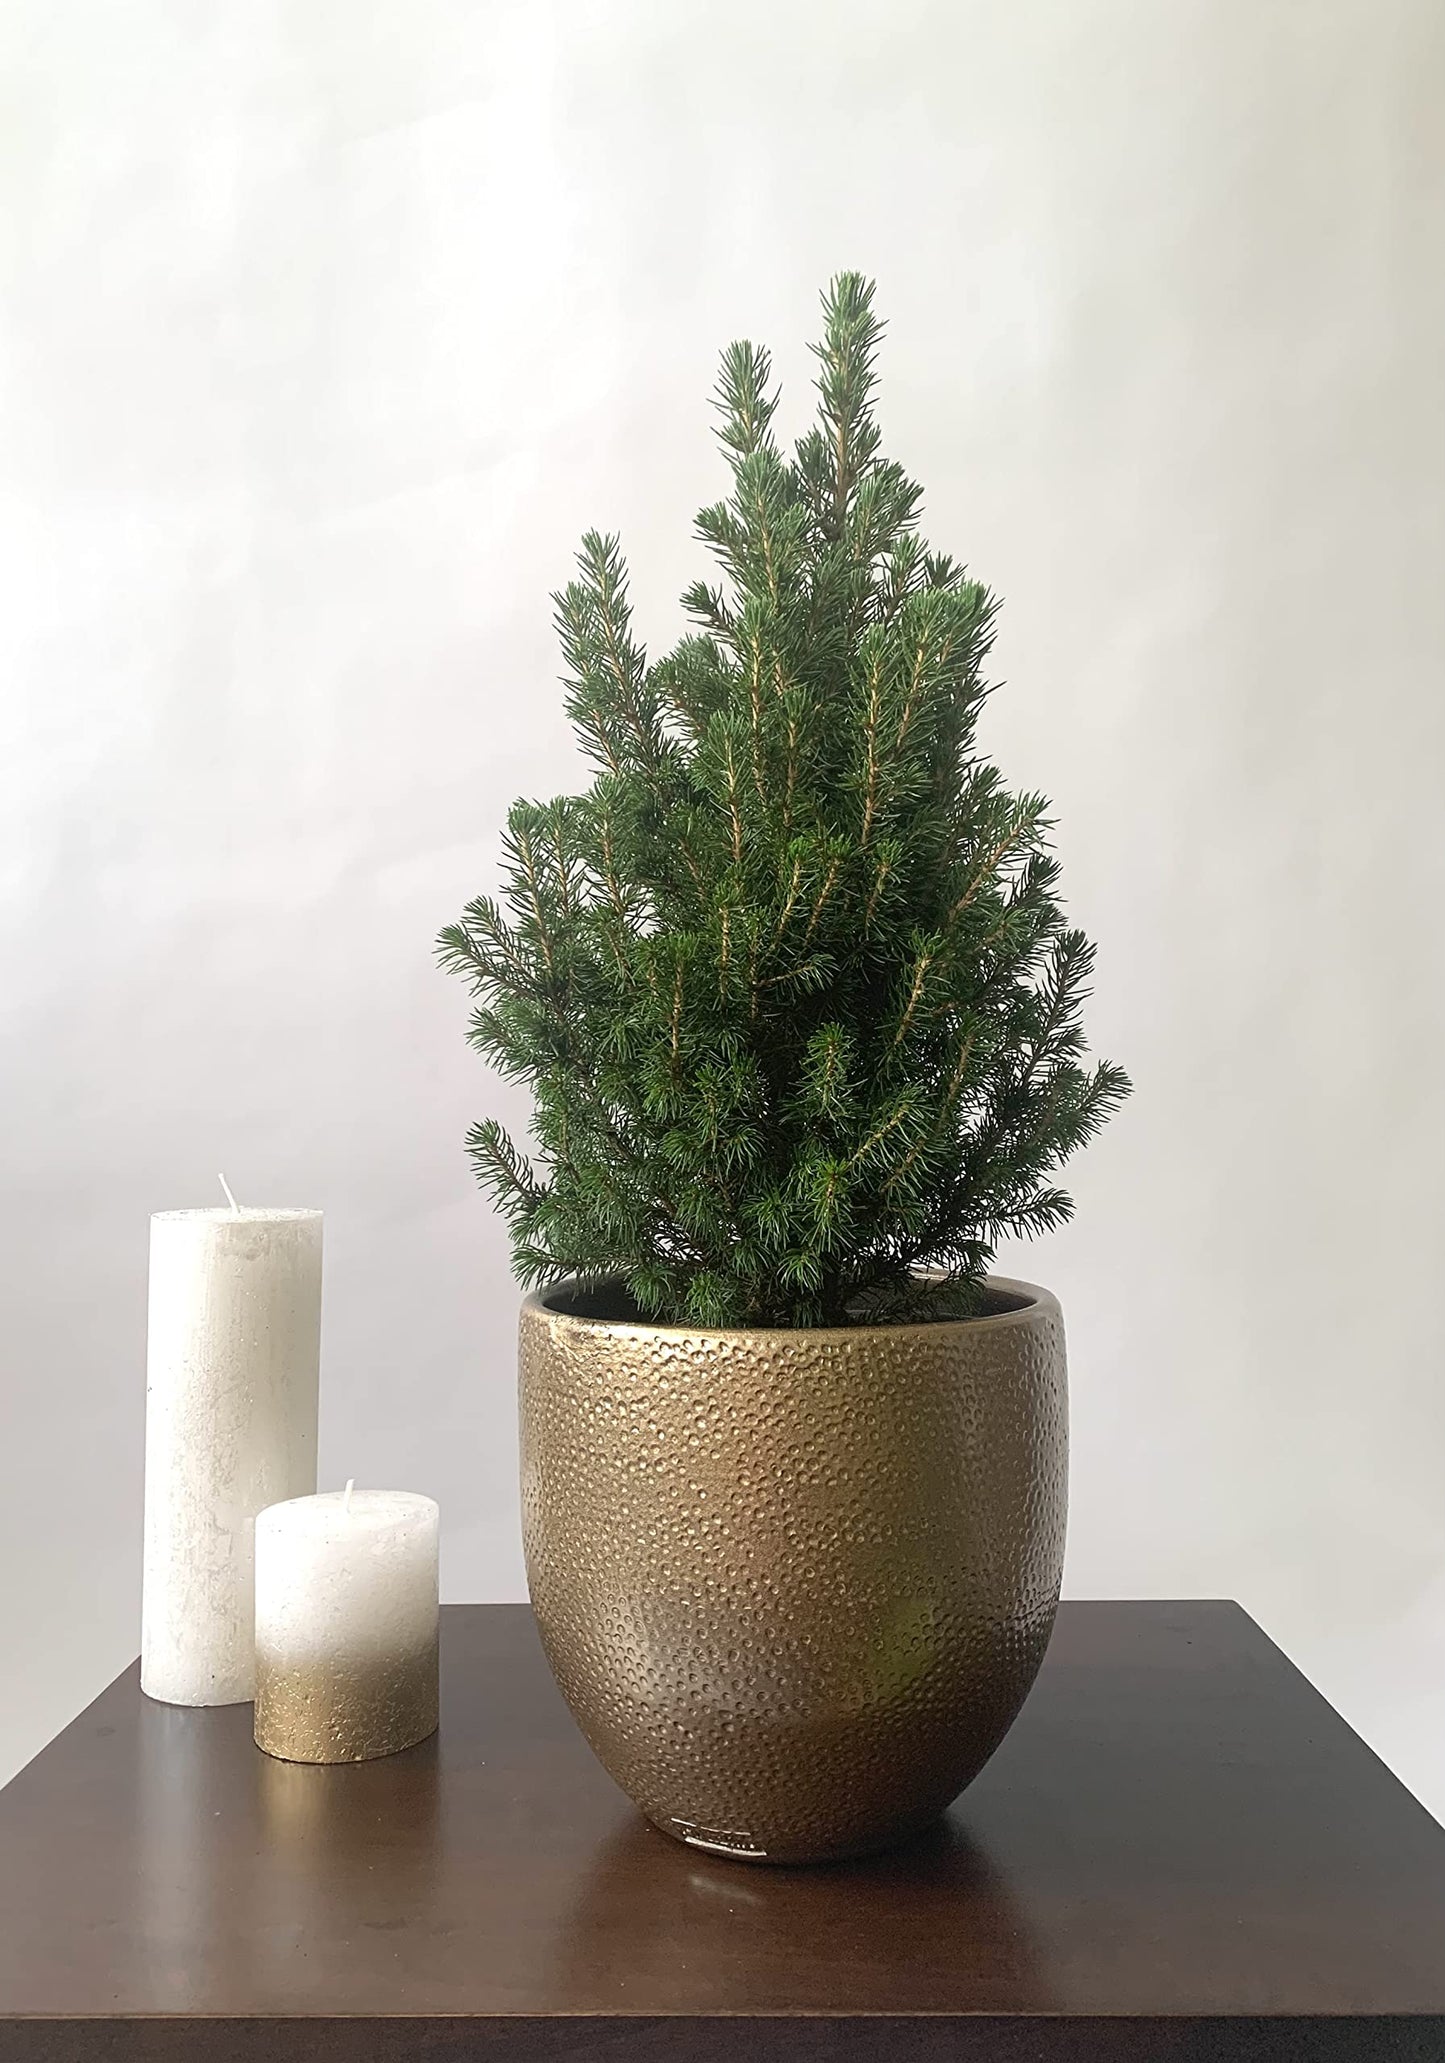 Christmas Tree - Live Potted Pine Tree - Miniature Spruce 'Picea Glauca' - 1 x Full Plant in 15cm Pot